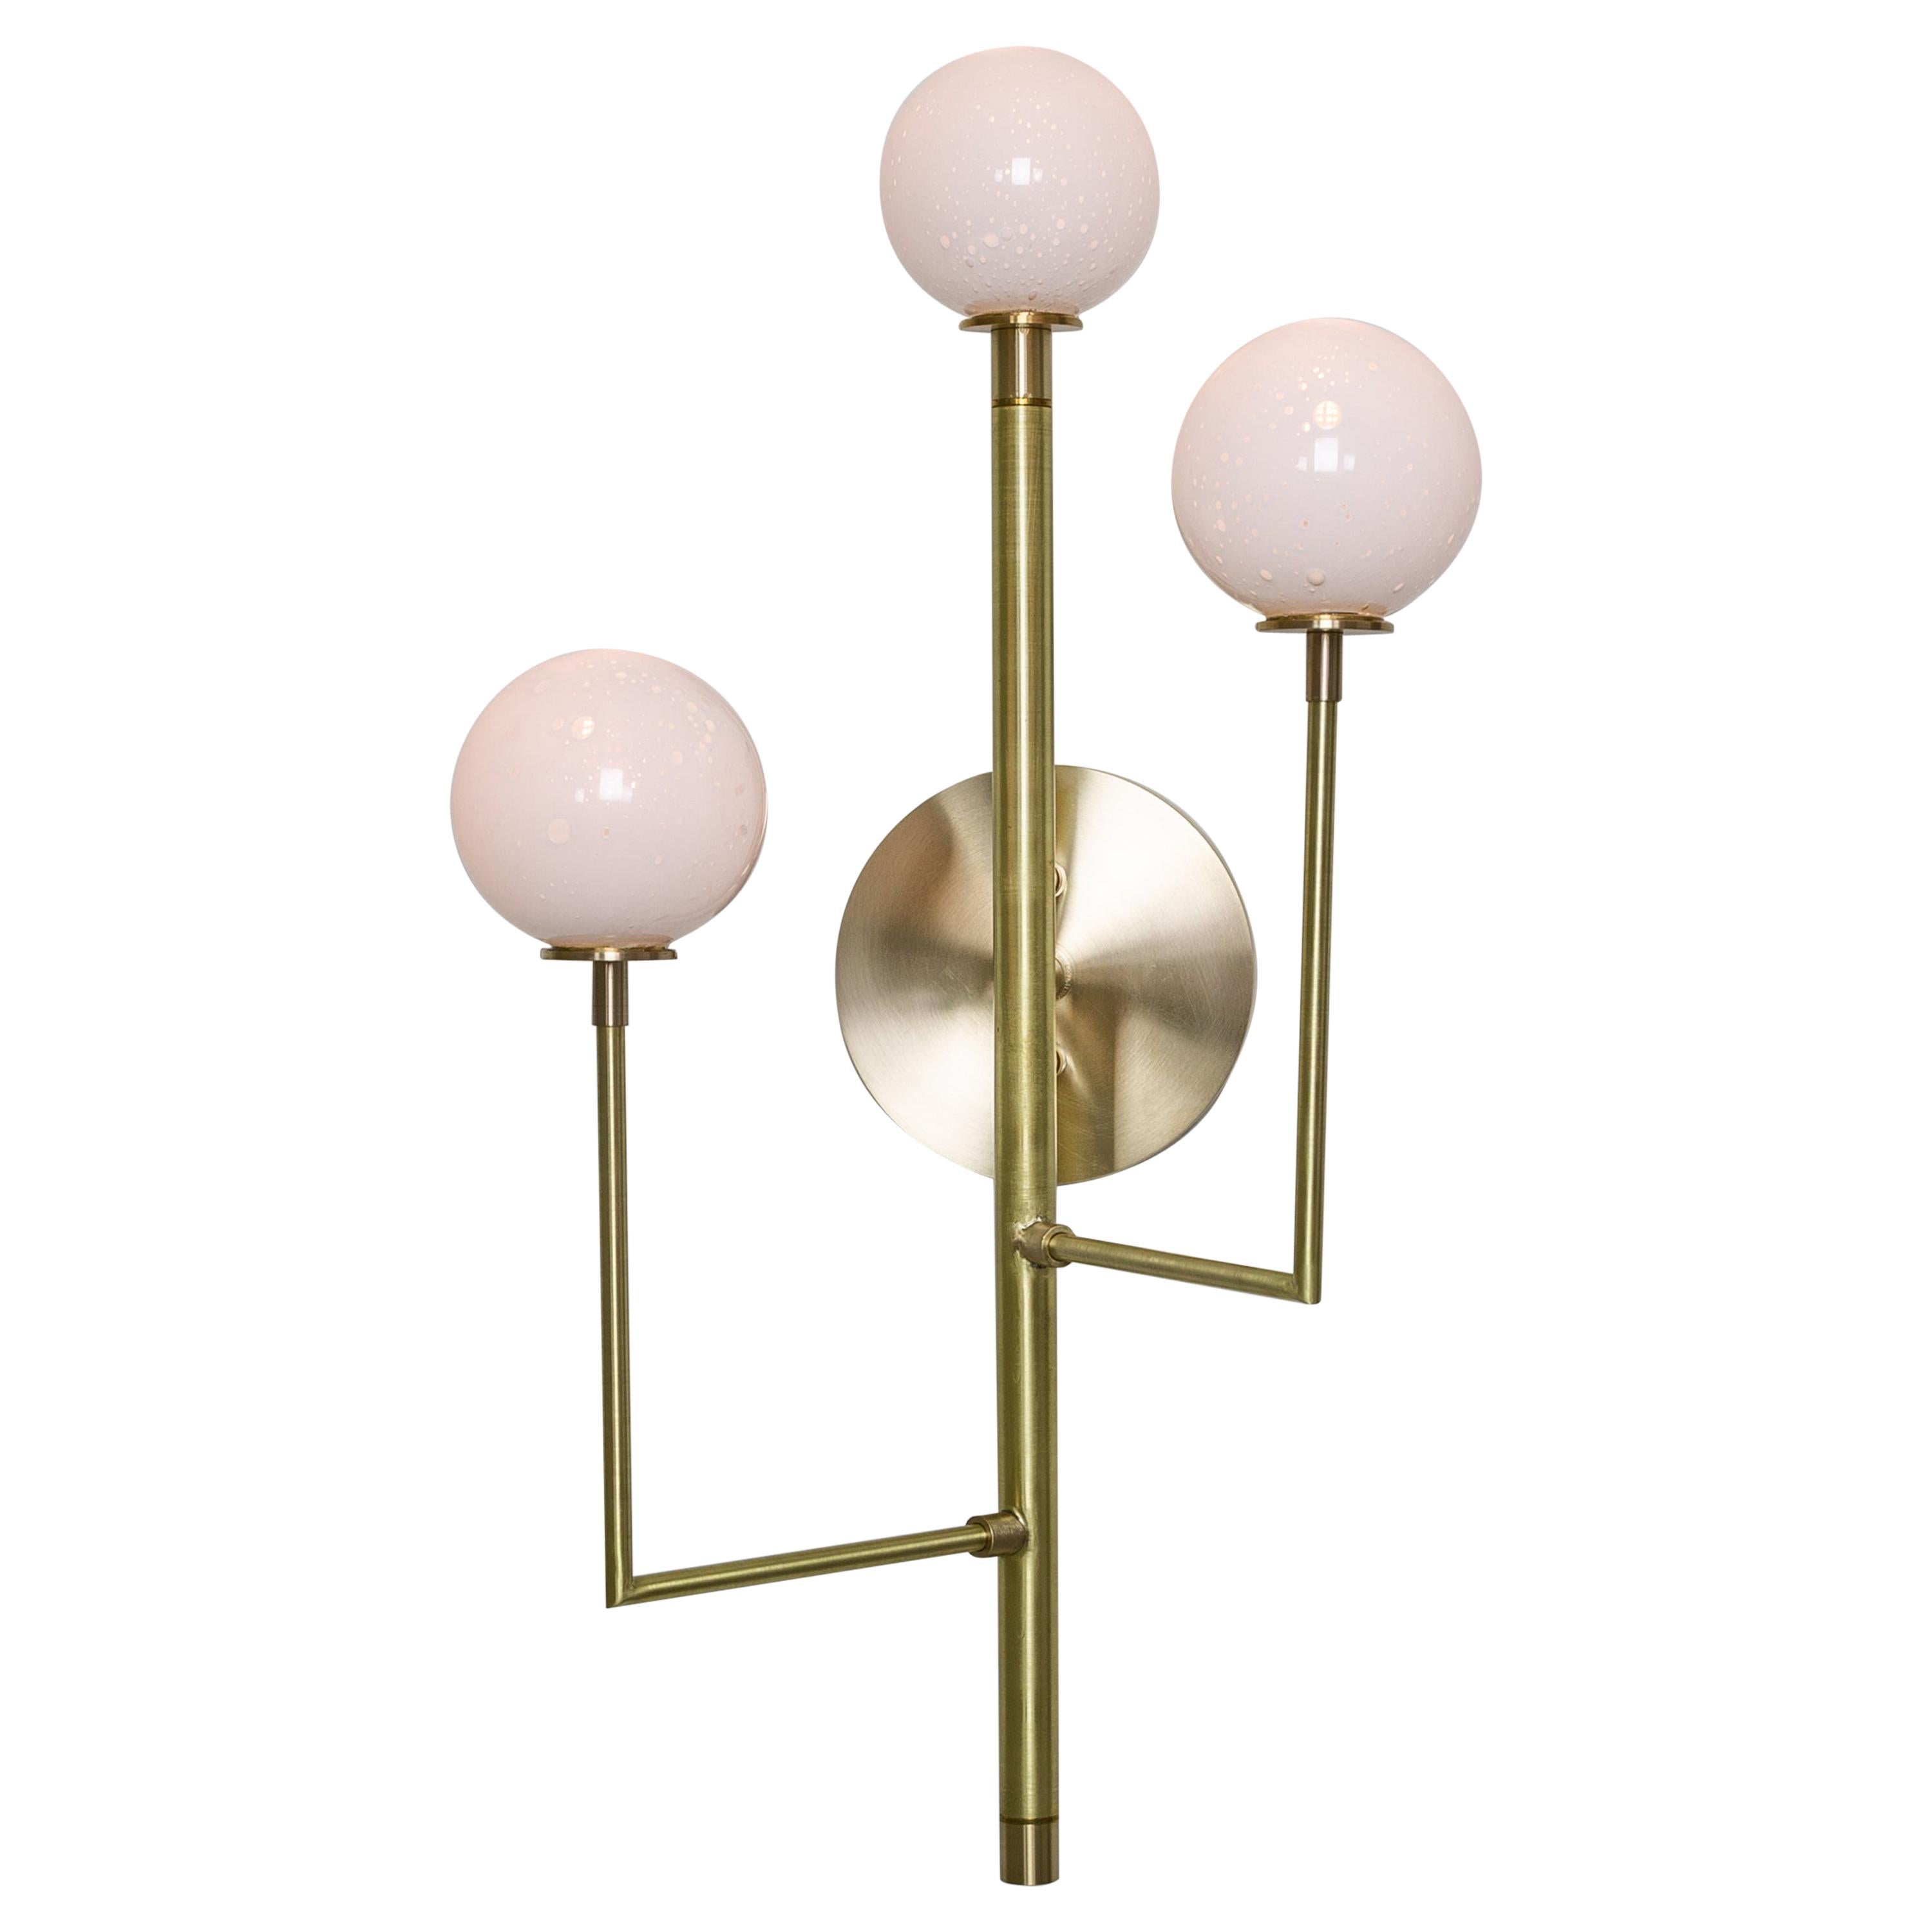 Halo Sconce 3, Brass, Hand Blown Glass Contemporary Wall Sconce, Kalin Asenov